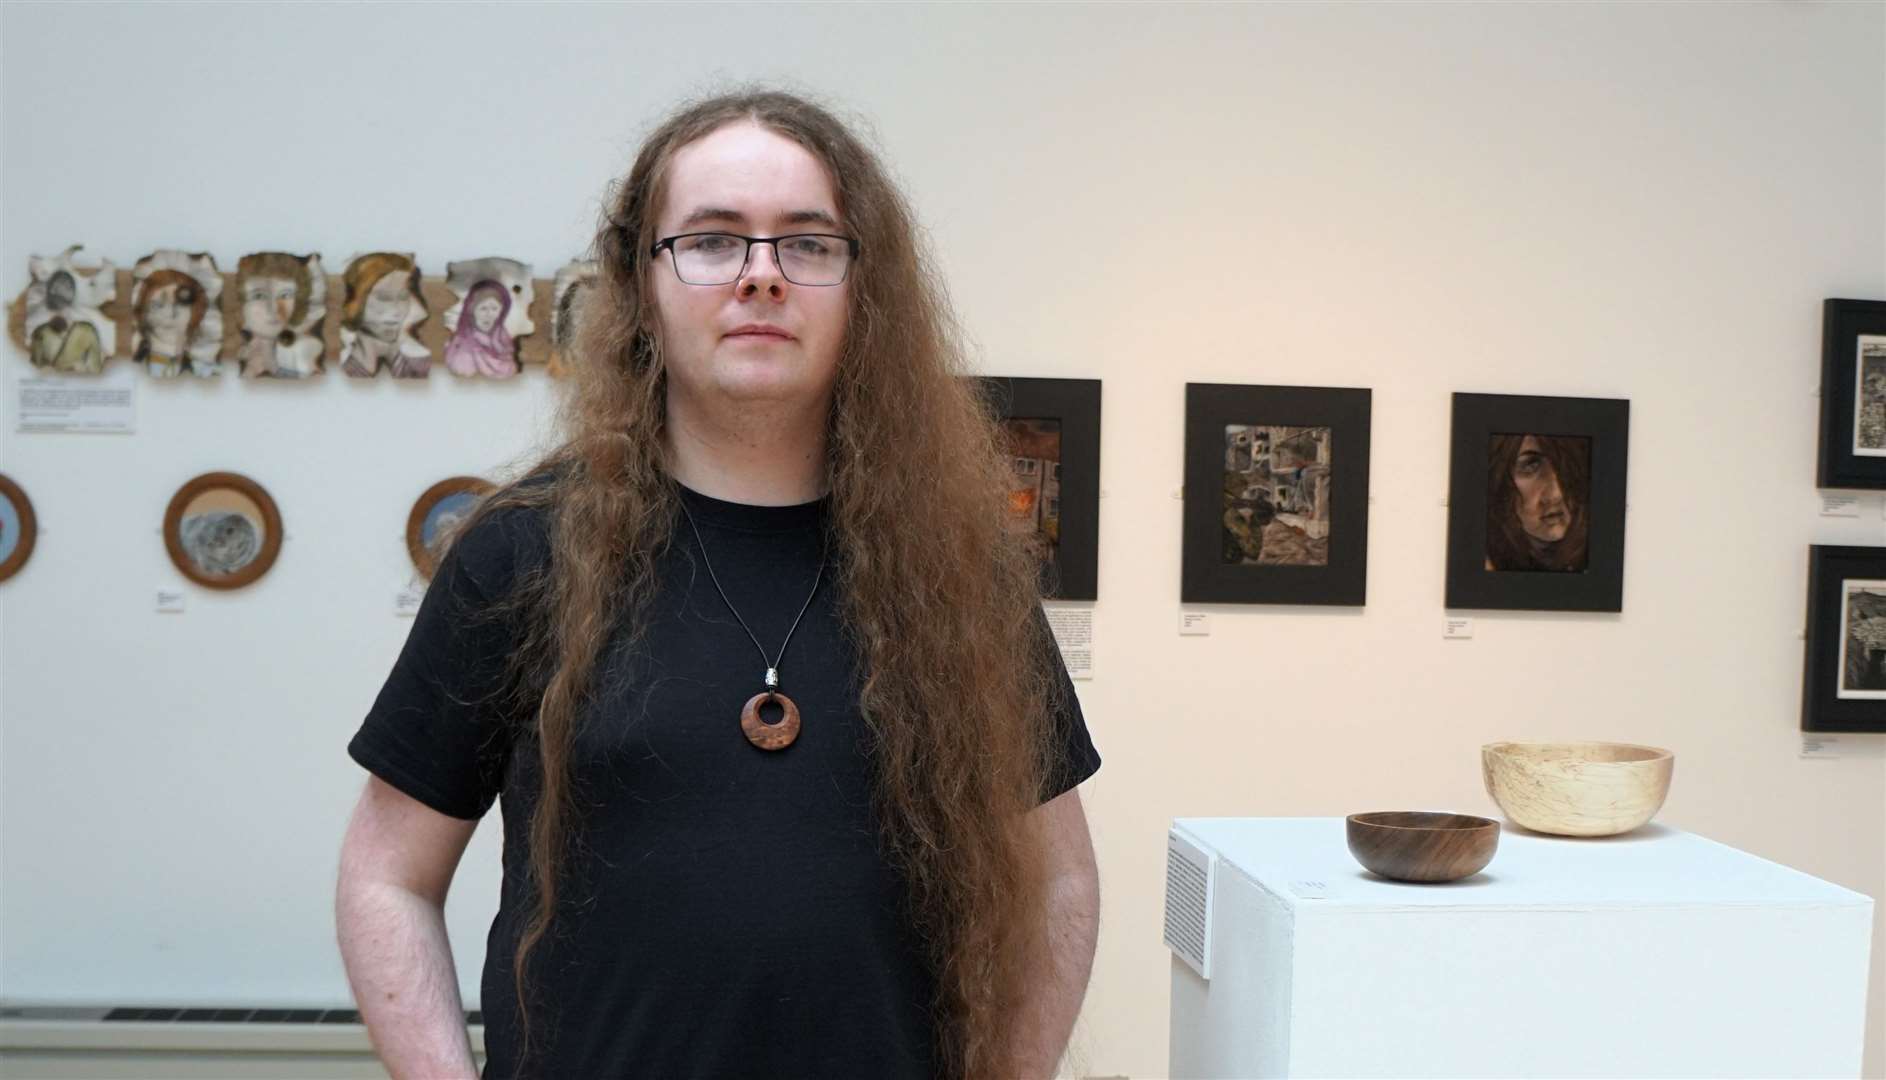 Joshua Irvine displays his excellence as a woodturner with several pieces on display. Picture: DGS